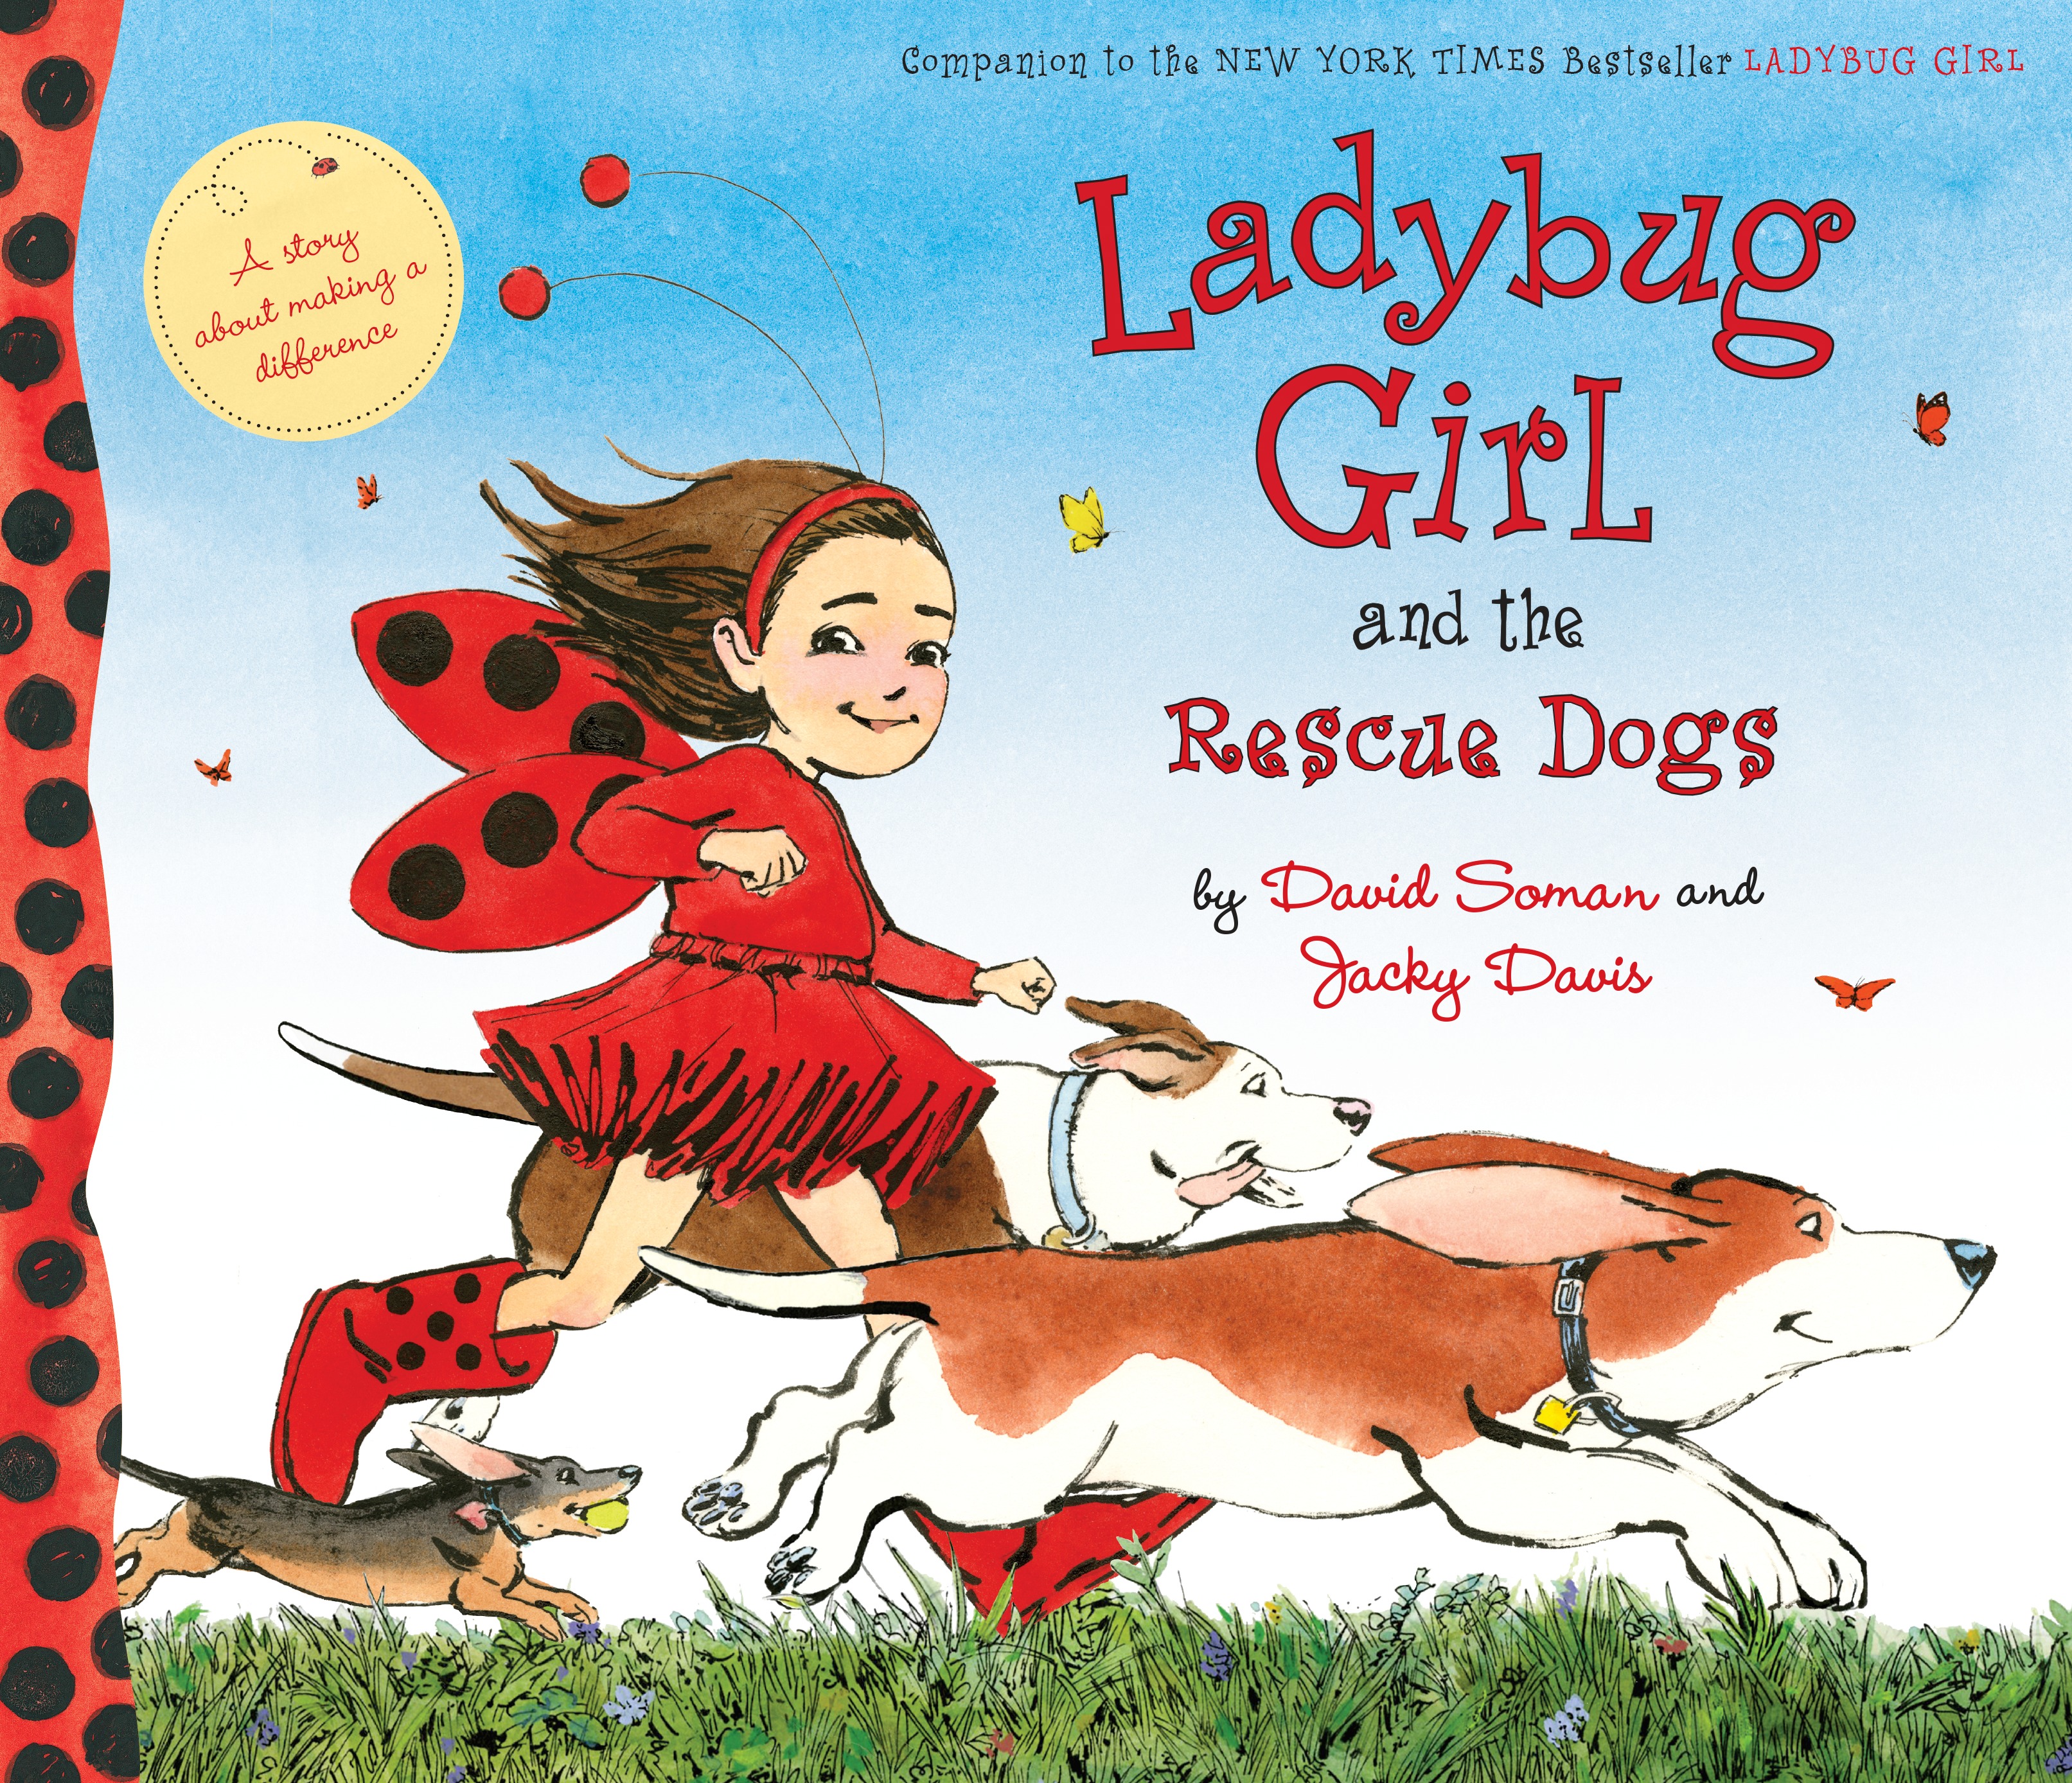 Sunday Story Time with David Soman & Jacky Davis (Authors of Ladybug Girl and the Rescue Dogs)